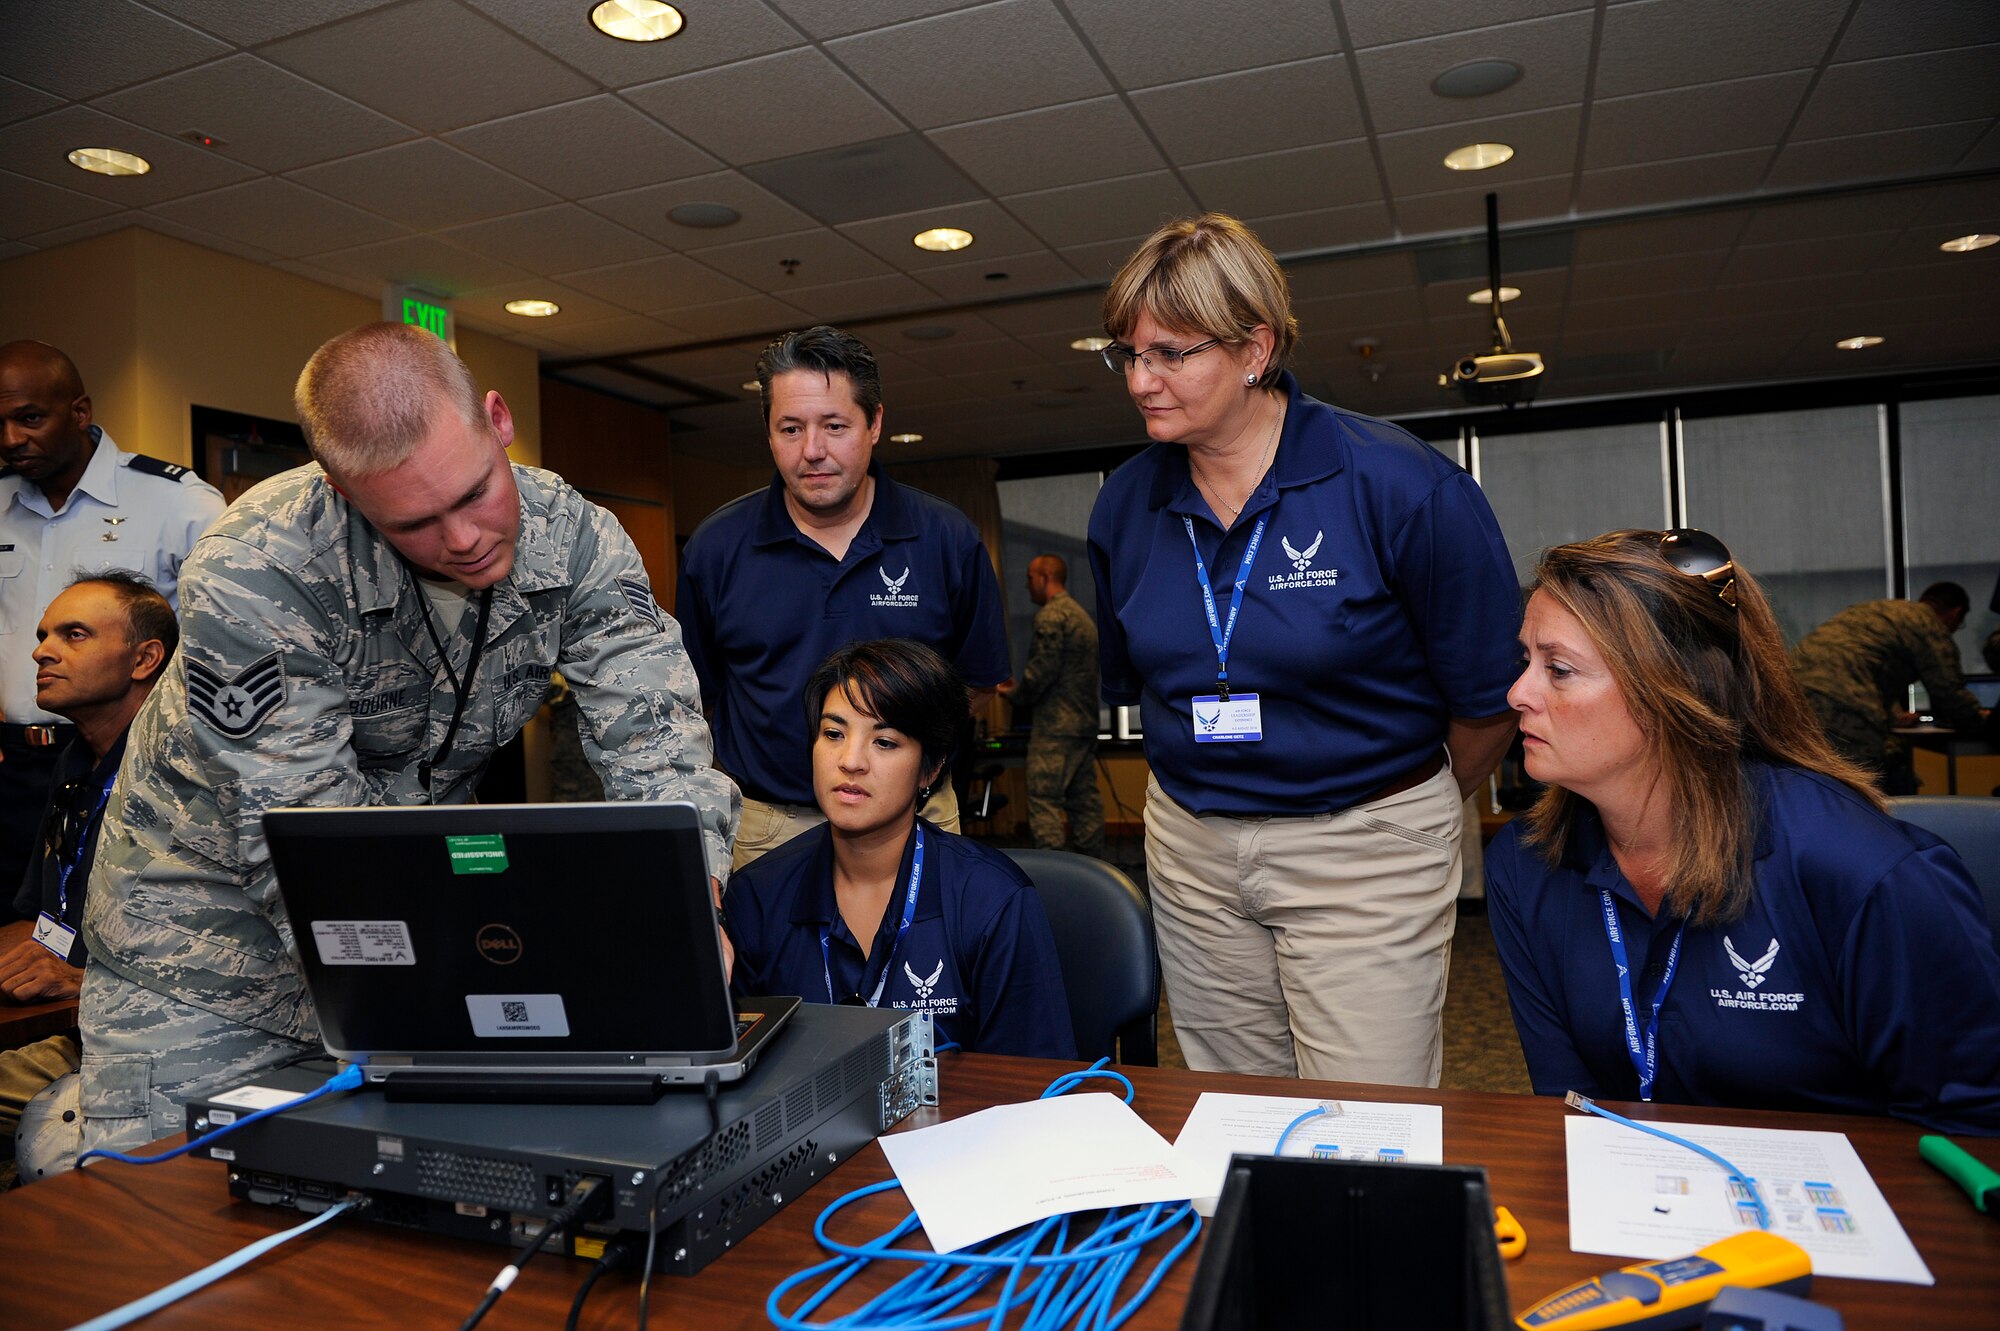 Staff Sgt. Charles Osbourne, 50th Space Communications Squadron, discusses network security with teachers (L-R) Naomi Edwards, Charlene Getz, and Darcie Starkfregoe during an Air Force Recruiting Service sponsored visit here, Monday.  The visit allowed tens of FIRST educators from across the nation to highlight the many STEM opportunities within the Air Force.  (U.S. Air Force photo/Christopher DeWitt)